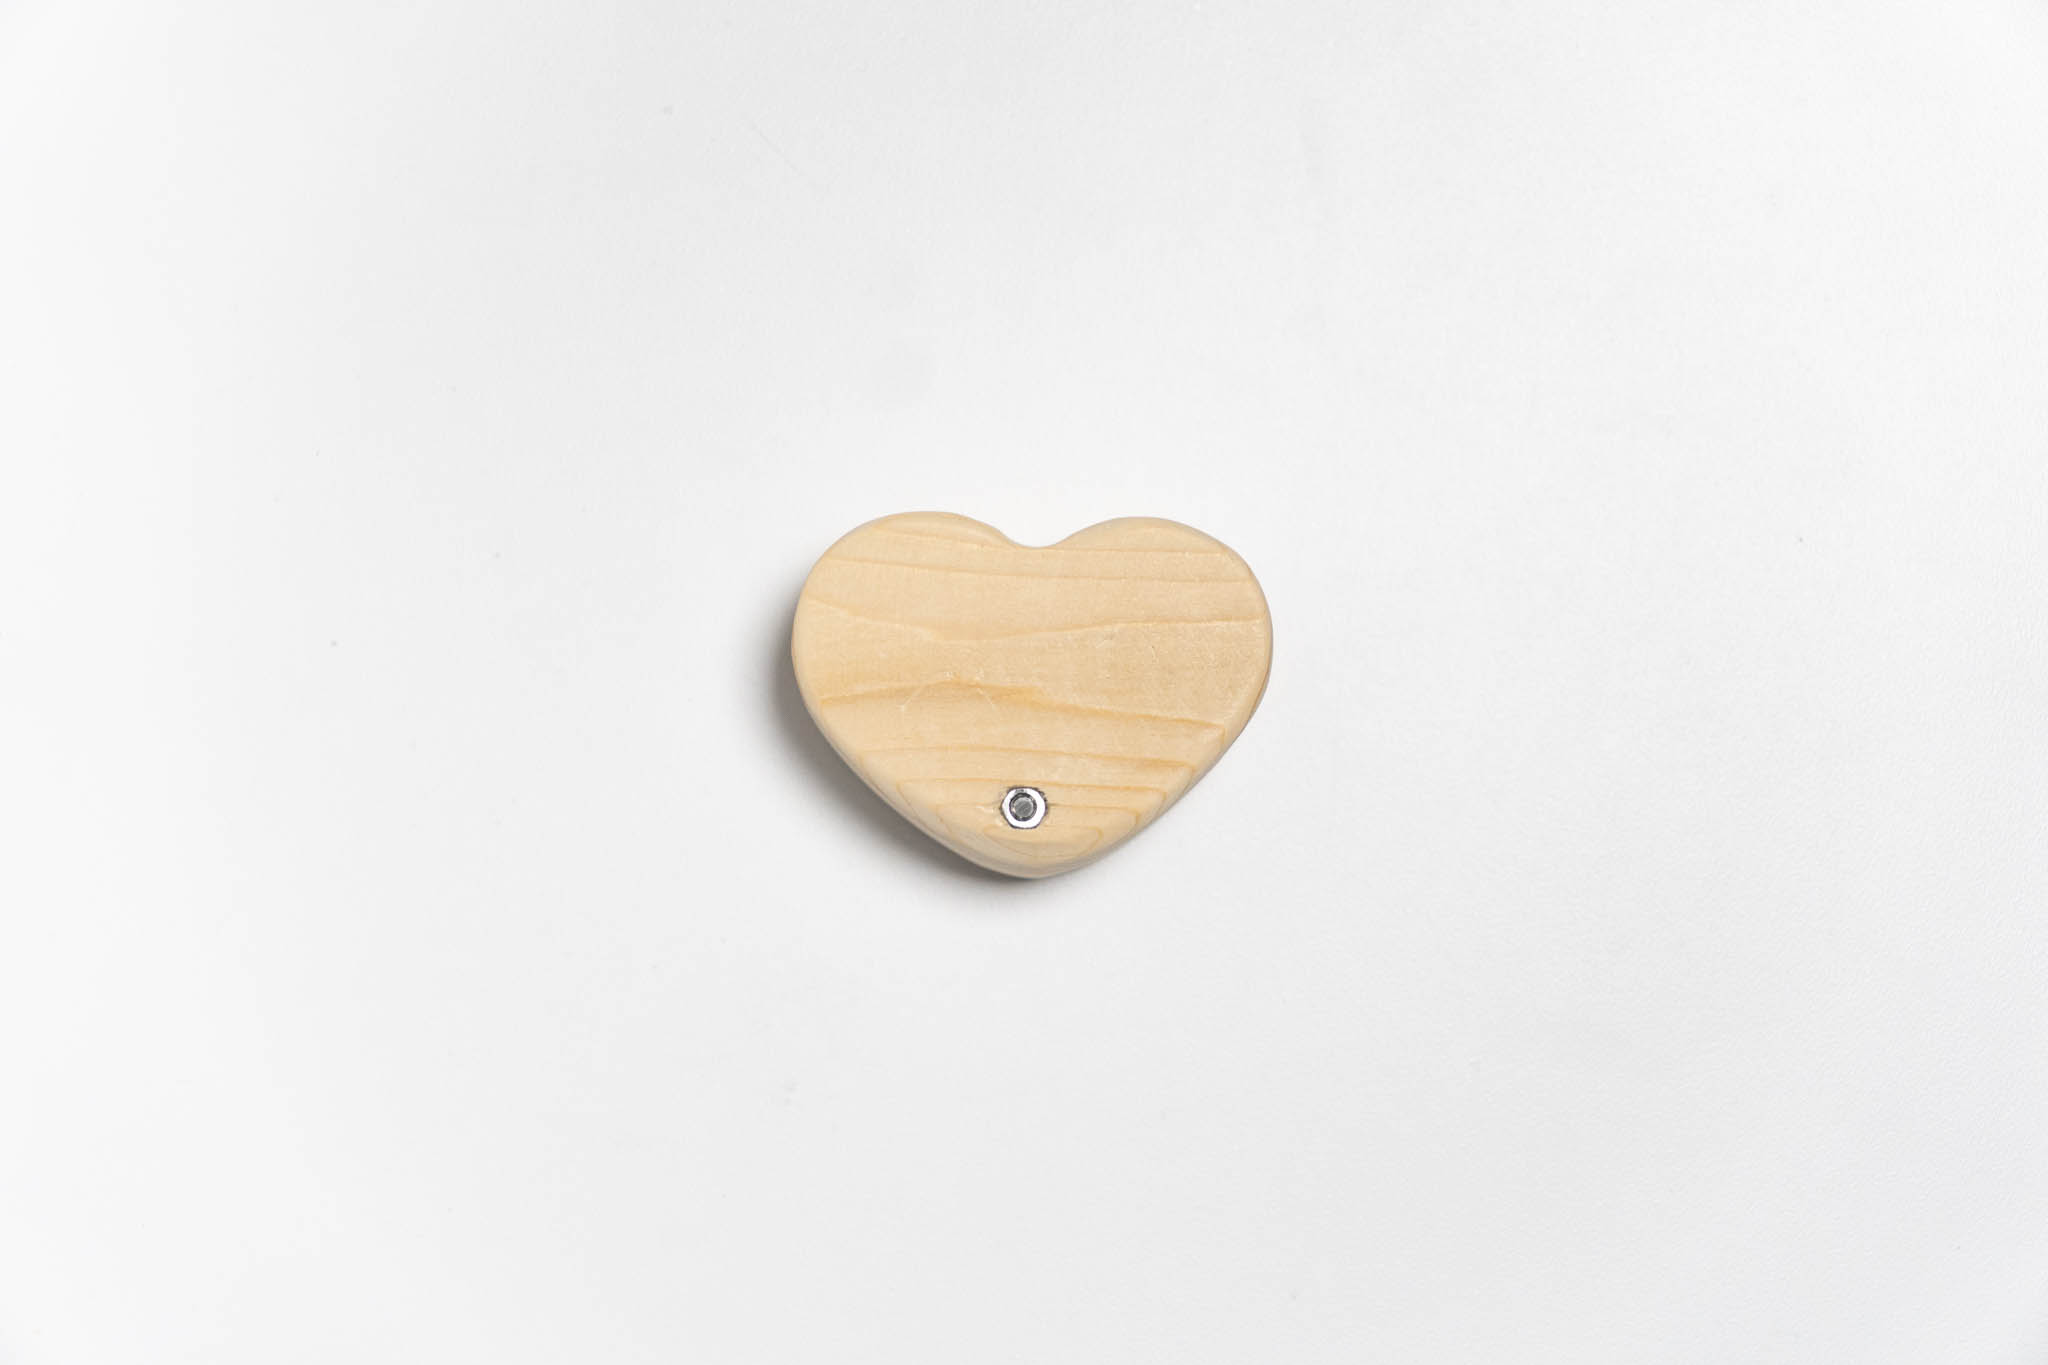 bottom view of a small heart-shaped wooden beige box with its lid ancored around the tip, closed